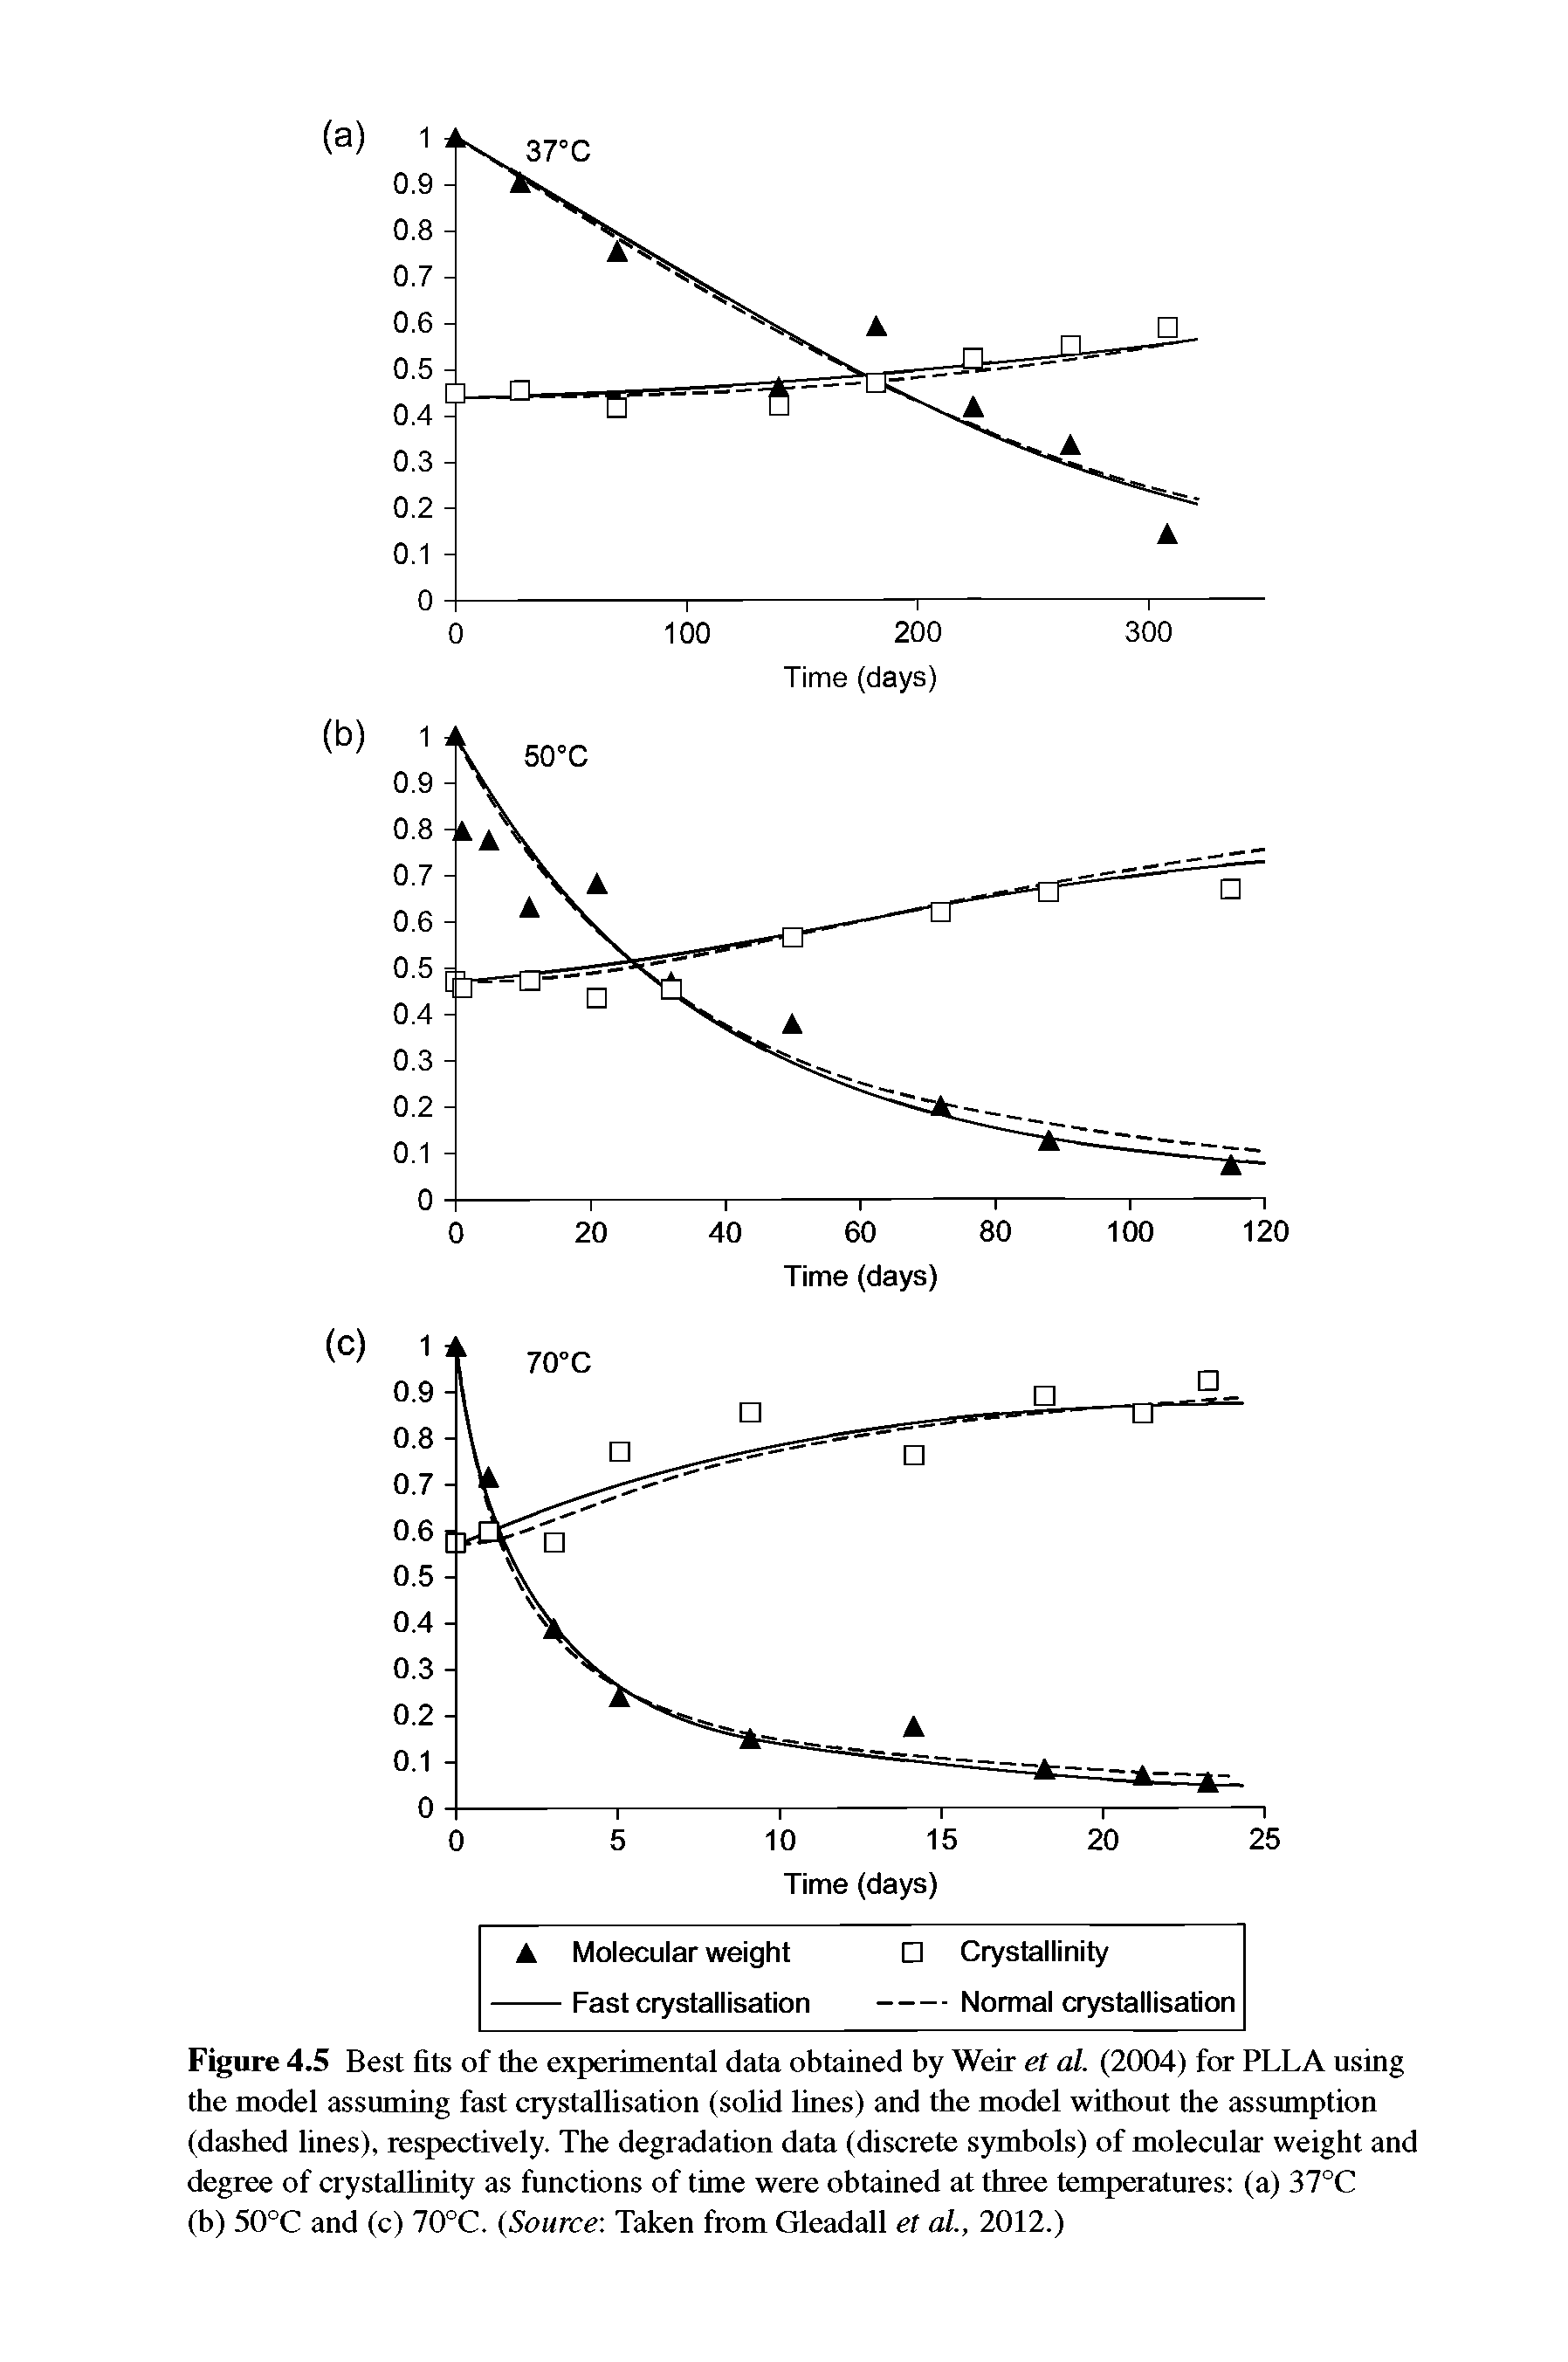 Figure 4.5 Best fits of the experimental data obtained by Weir et al. (2004) for PLLA using the model assuming fast crystallisation (solid lines) and the model without the assumption (dashed lines), respectively. The degradation data (discrete symbols) of molecular weight and degree of crystalfinity as functions of time were obtained at three temperatures (a) 37°C (b) 50°C and (c) 70°C. Source Taken from Gleadall et al., 2012.)...